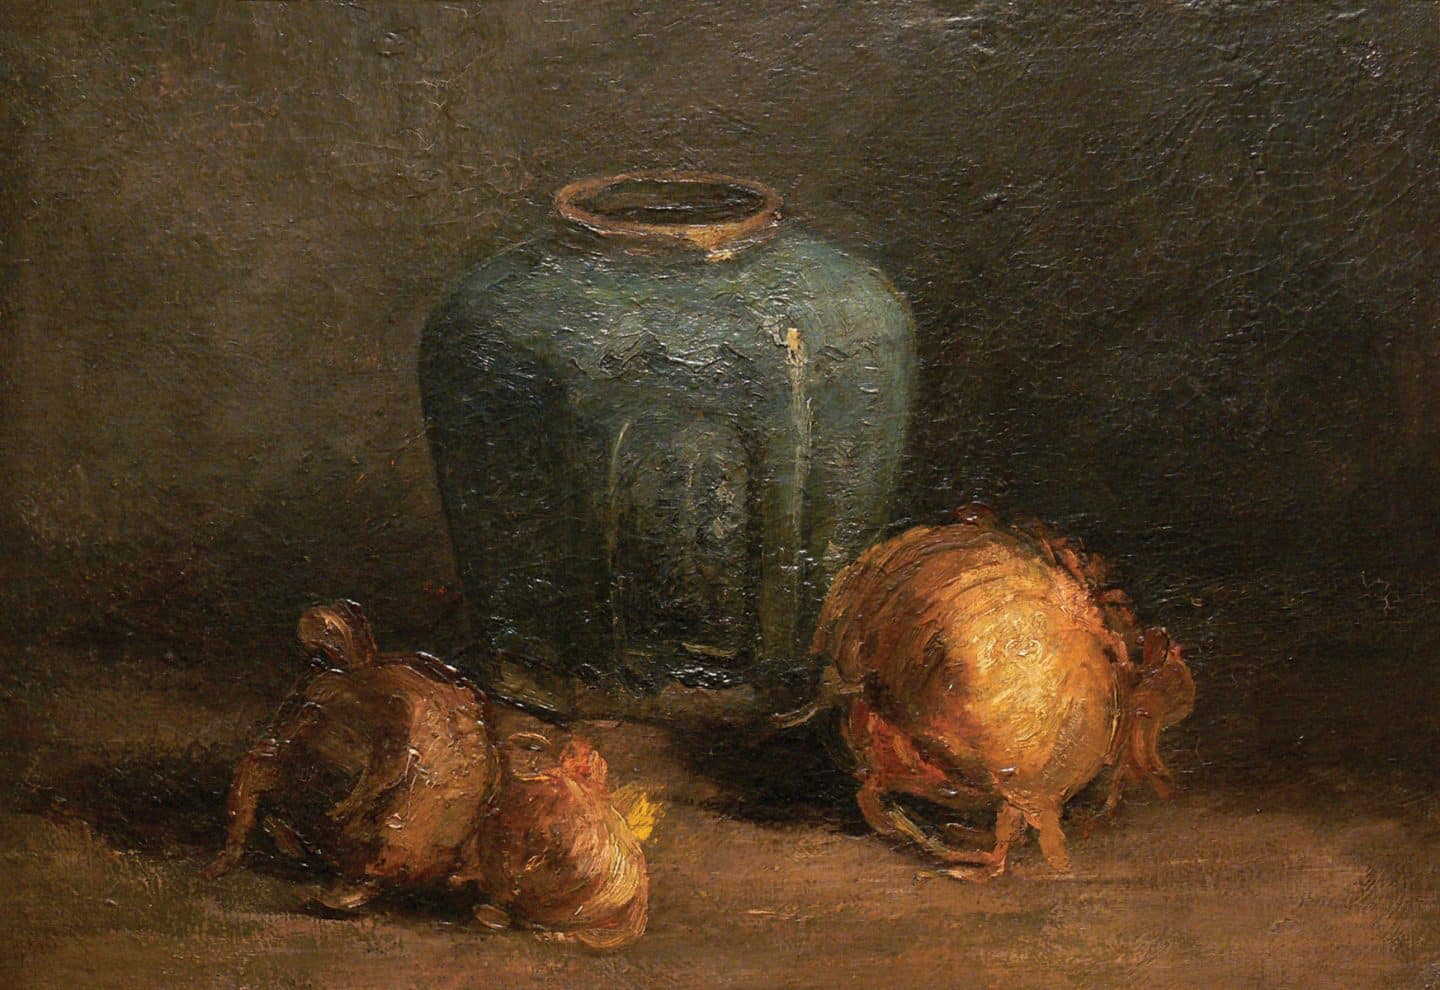 Vincent Van Gogh, Untitled, Still Life: Ginger Pot and Onions, 1885, oil on canvas. McMaster Museum of Art, McMaster University. Gift of Herman Levy, Esq., O.B.E., 1984